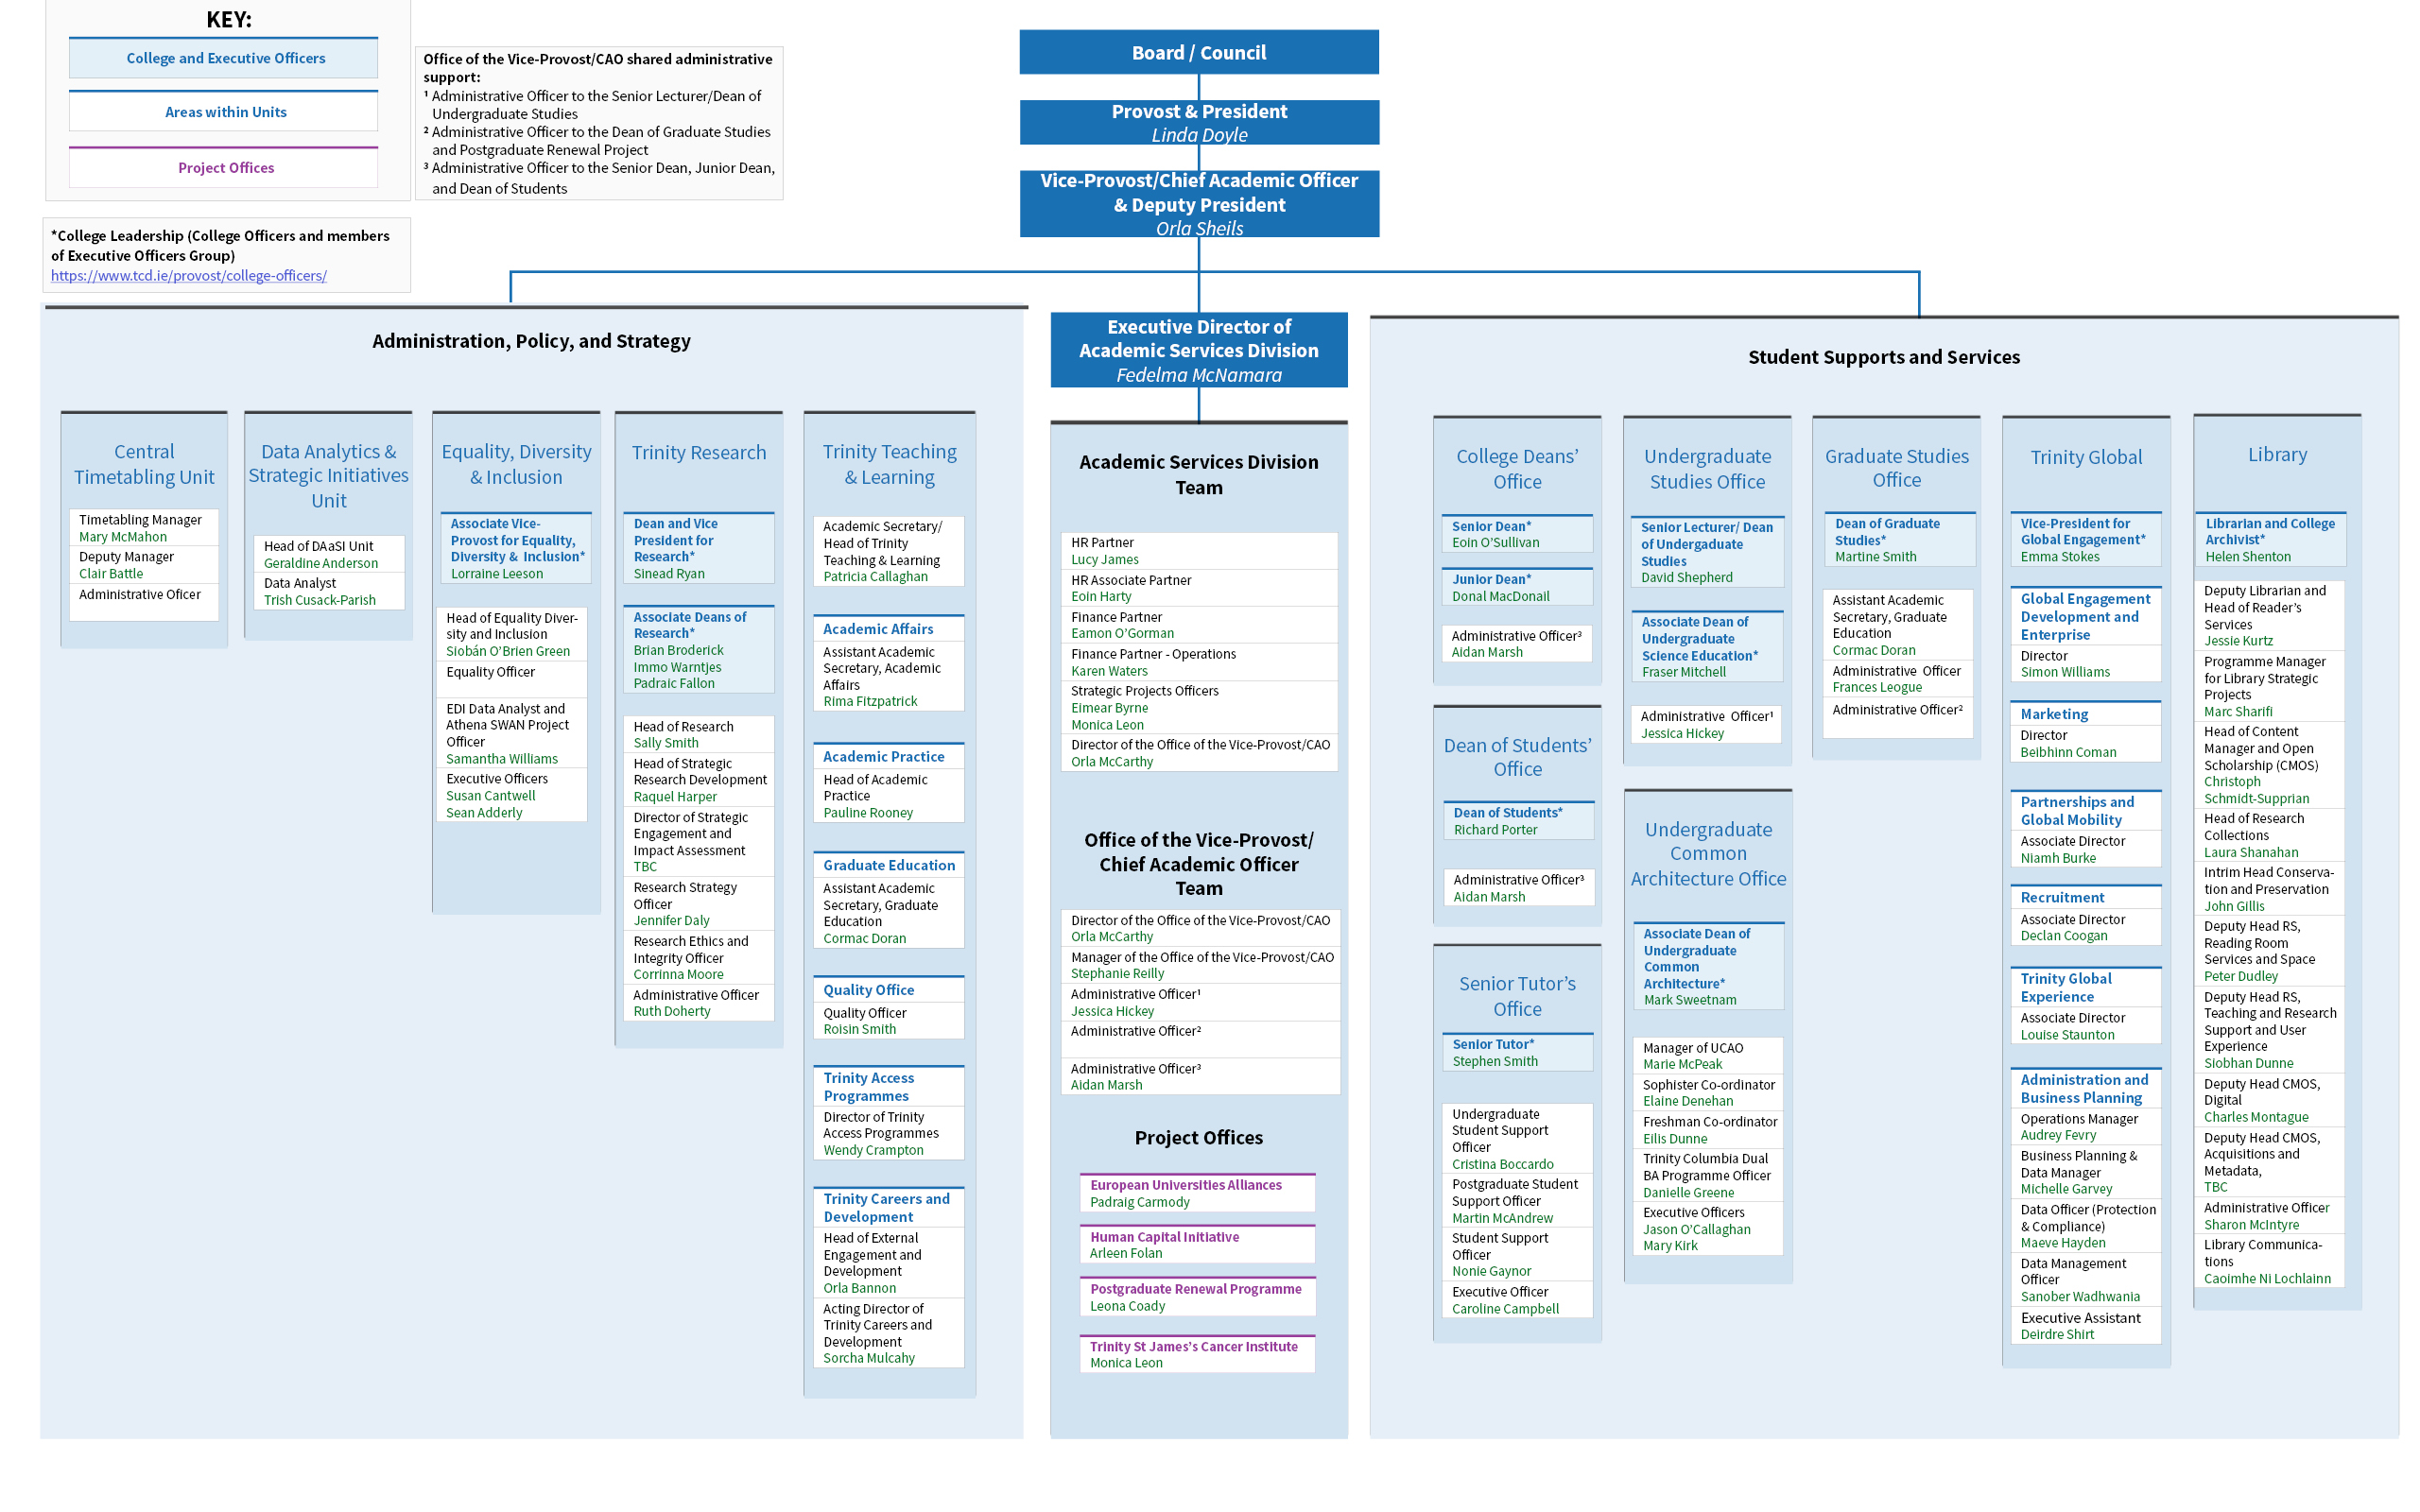 Organisation chart of Academic Services Division